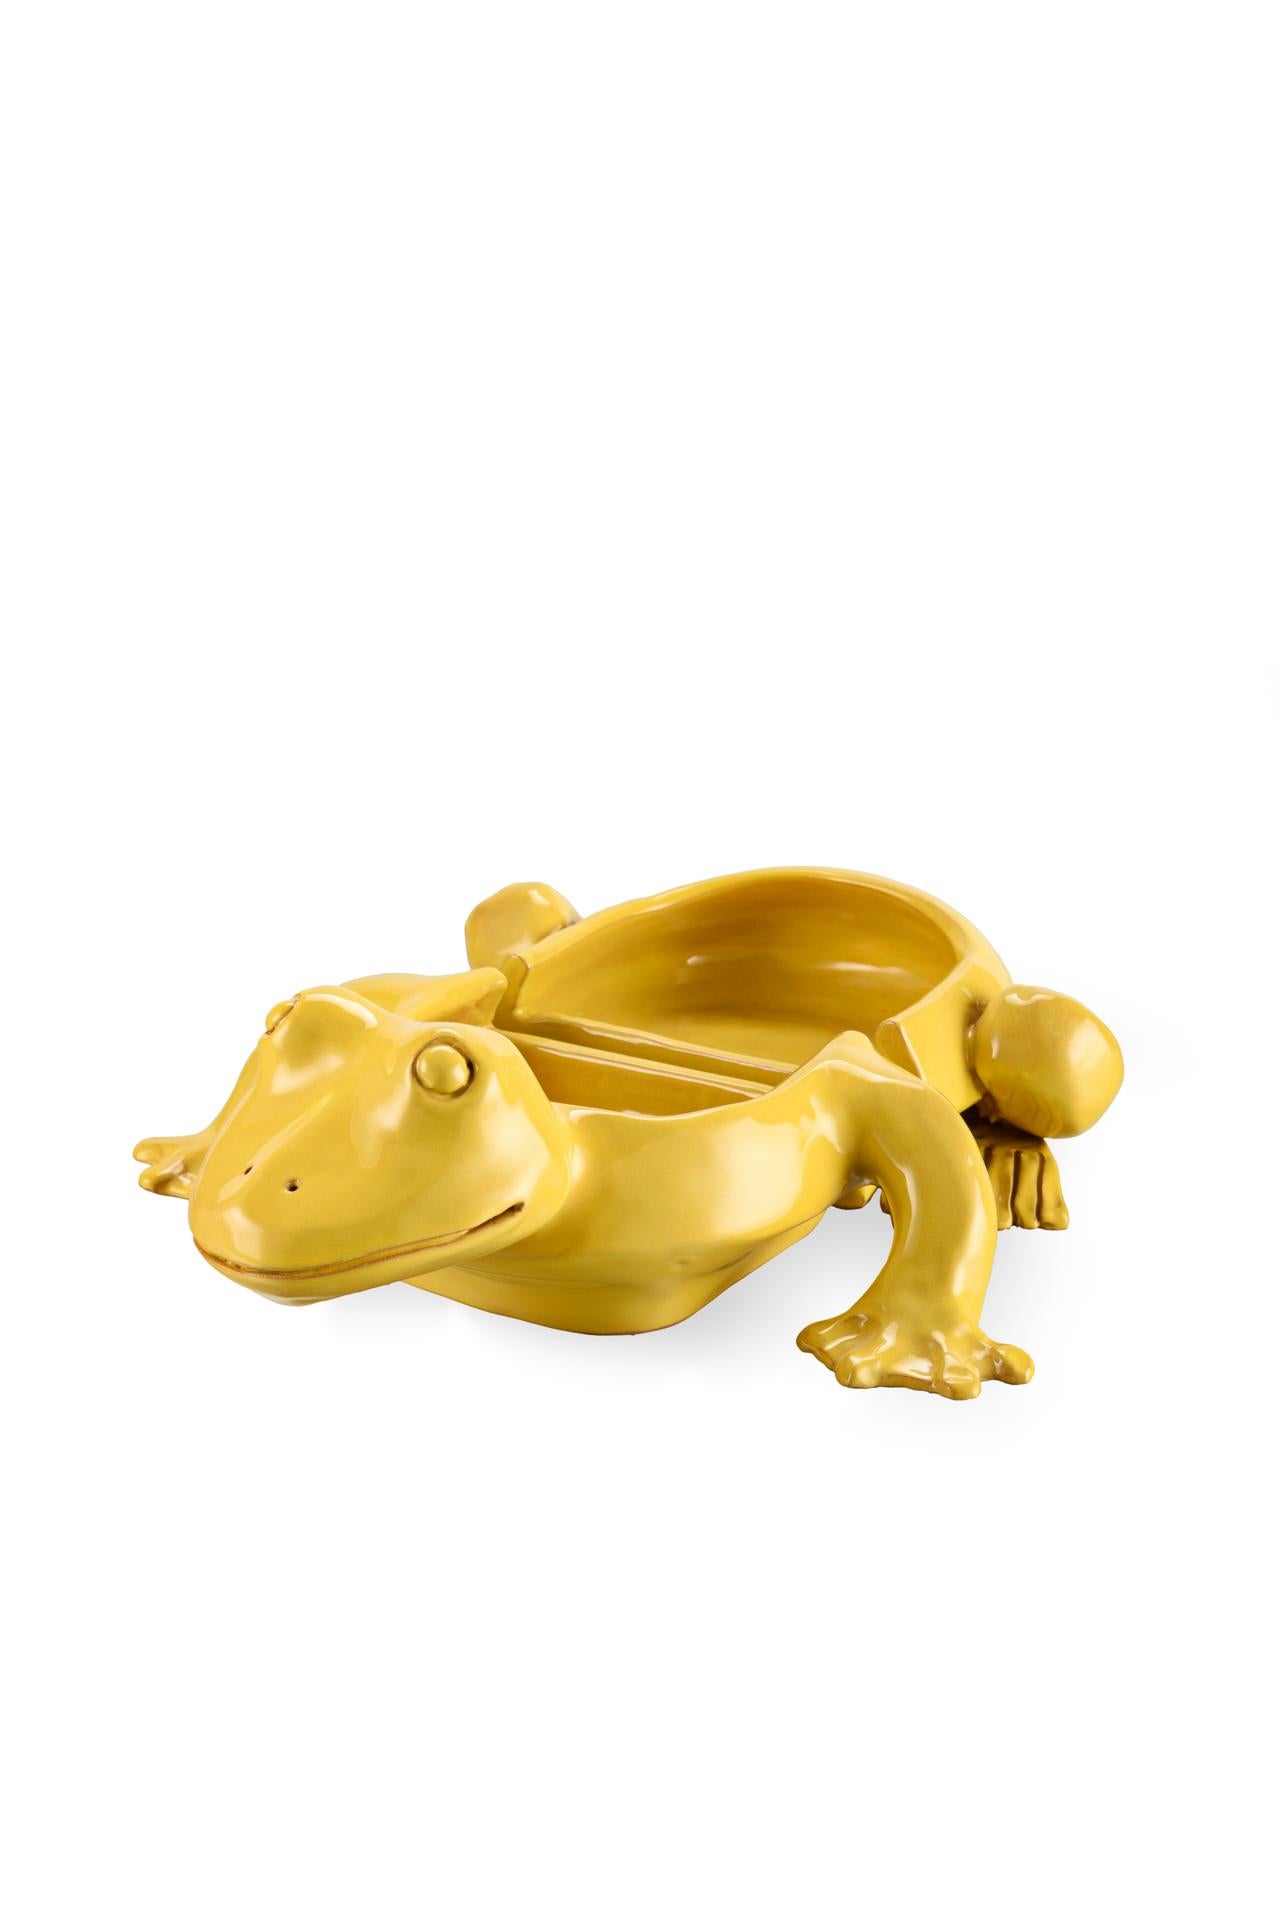 Other Freaklab Yellow Frog  2 part Bowl Made Entirely byHand in Ceramic  For Sale